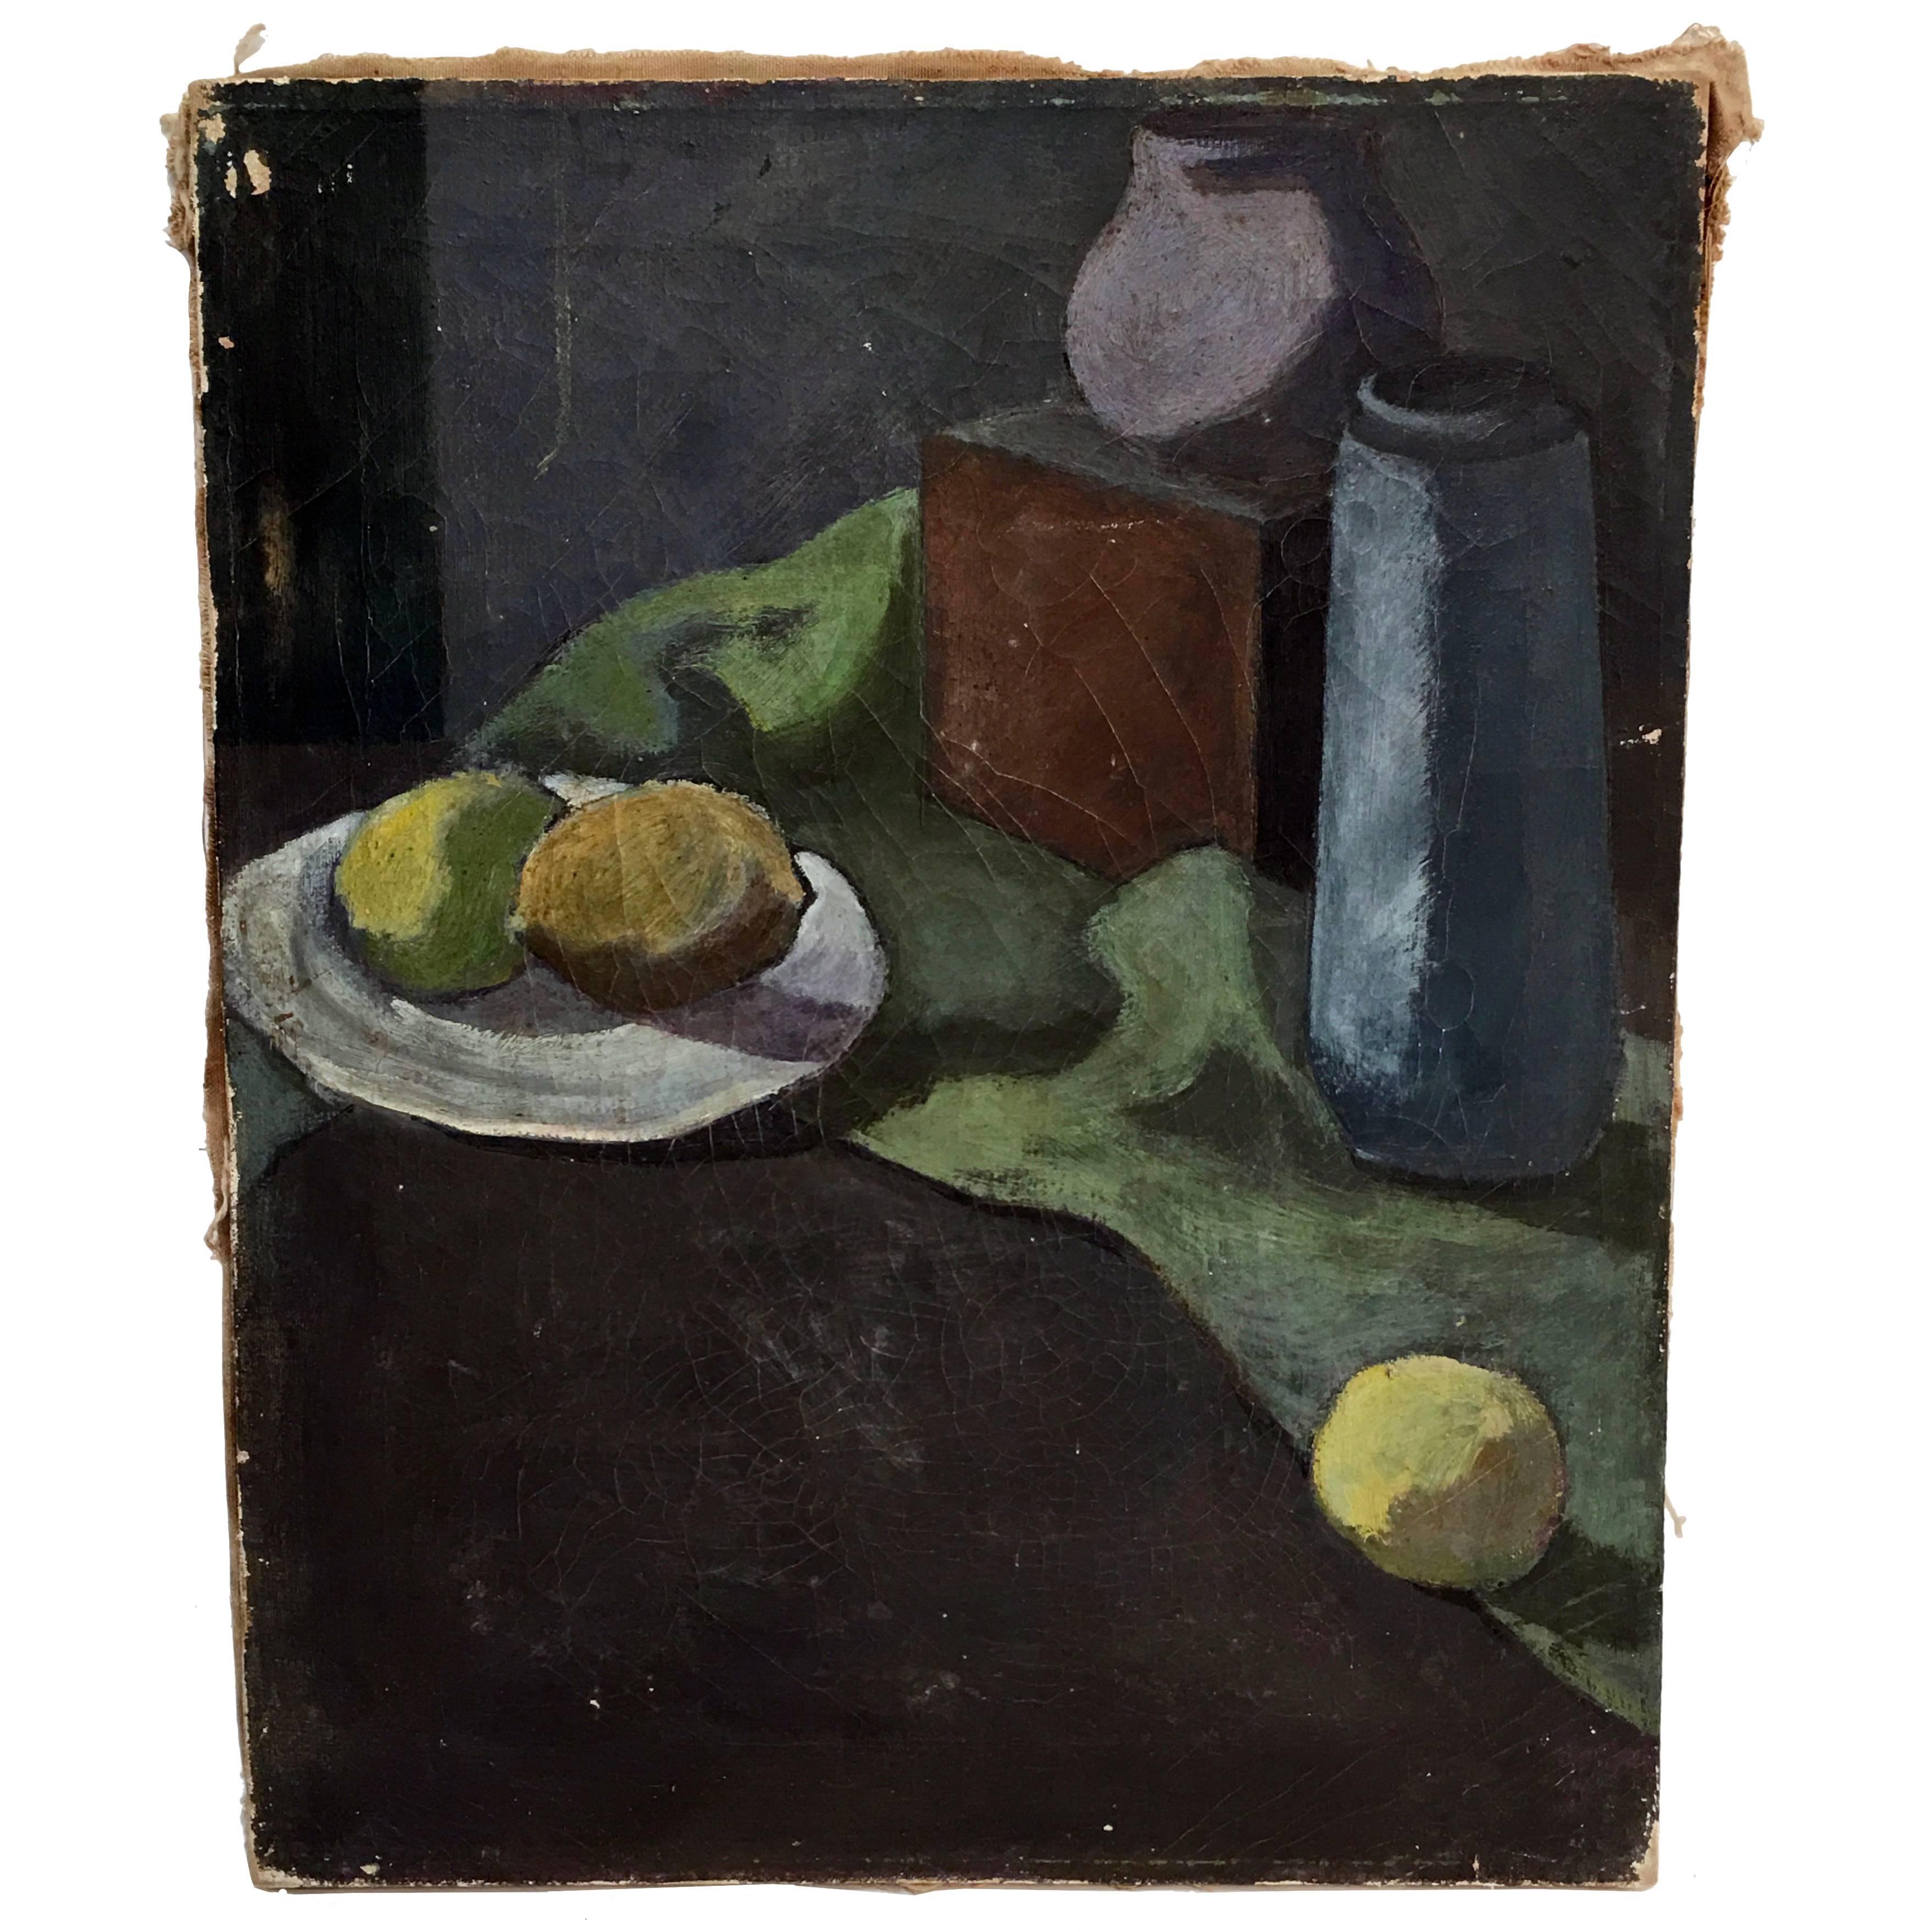 Still life painting by artist David Ladin (please see listed companion painting). Oil on canvas, newly framed, American, mid-20th century.